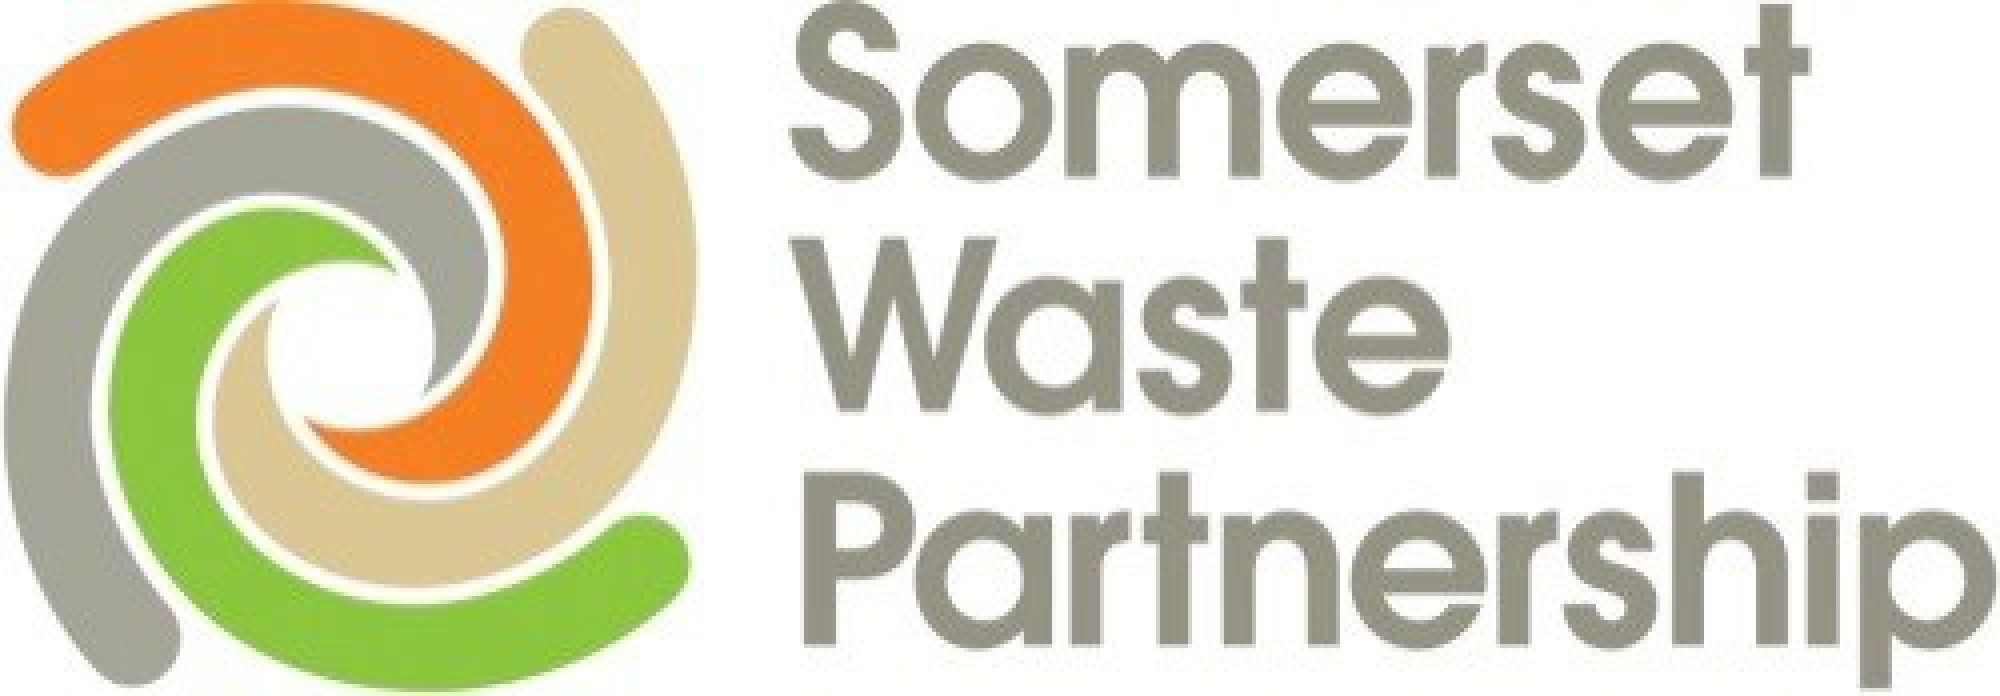 Update from Somerset Waste Partnership